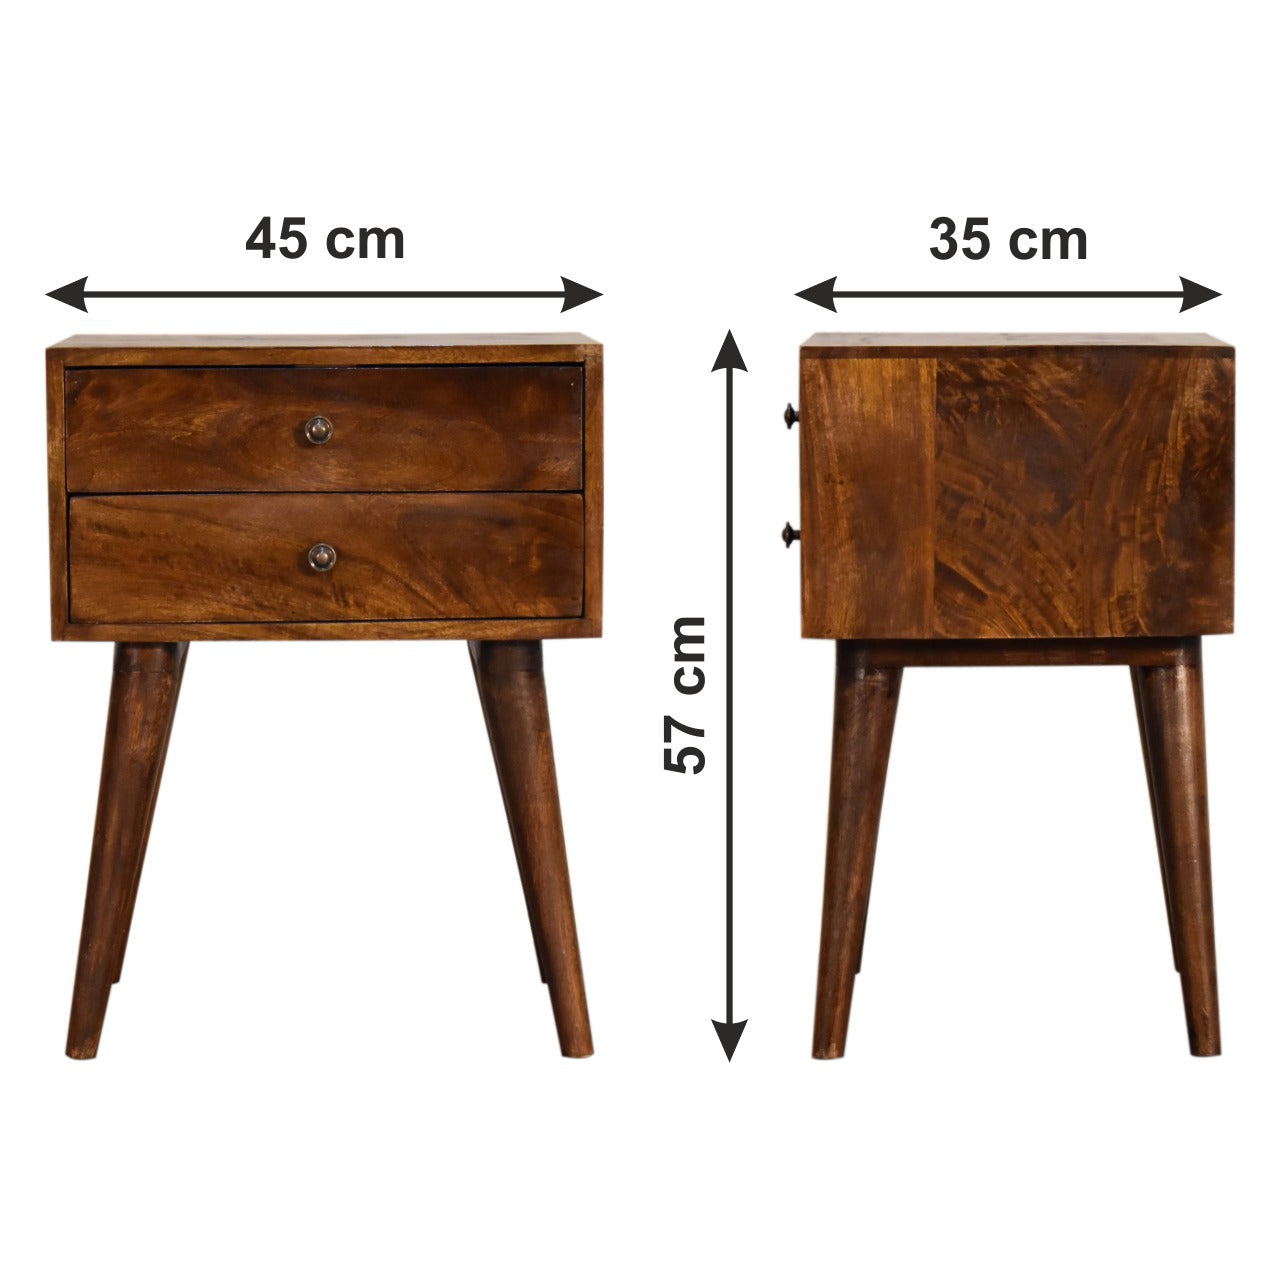 Blake handmade solid wood bedside table with 2 drawers in a deep chestnut finish | malletandplane.com